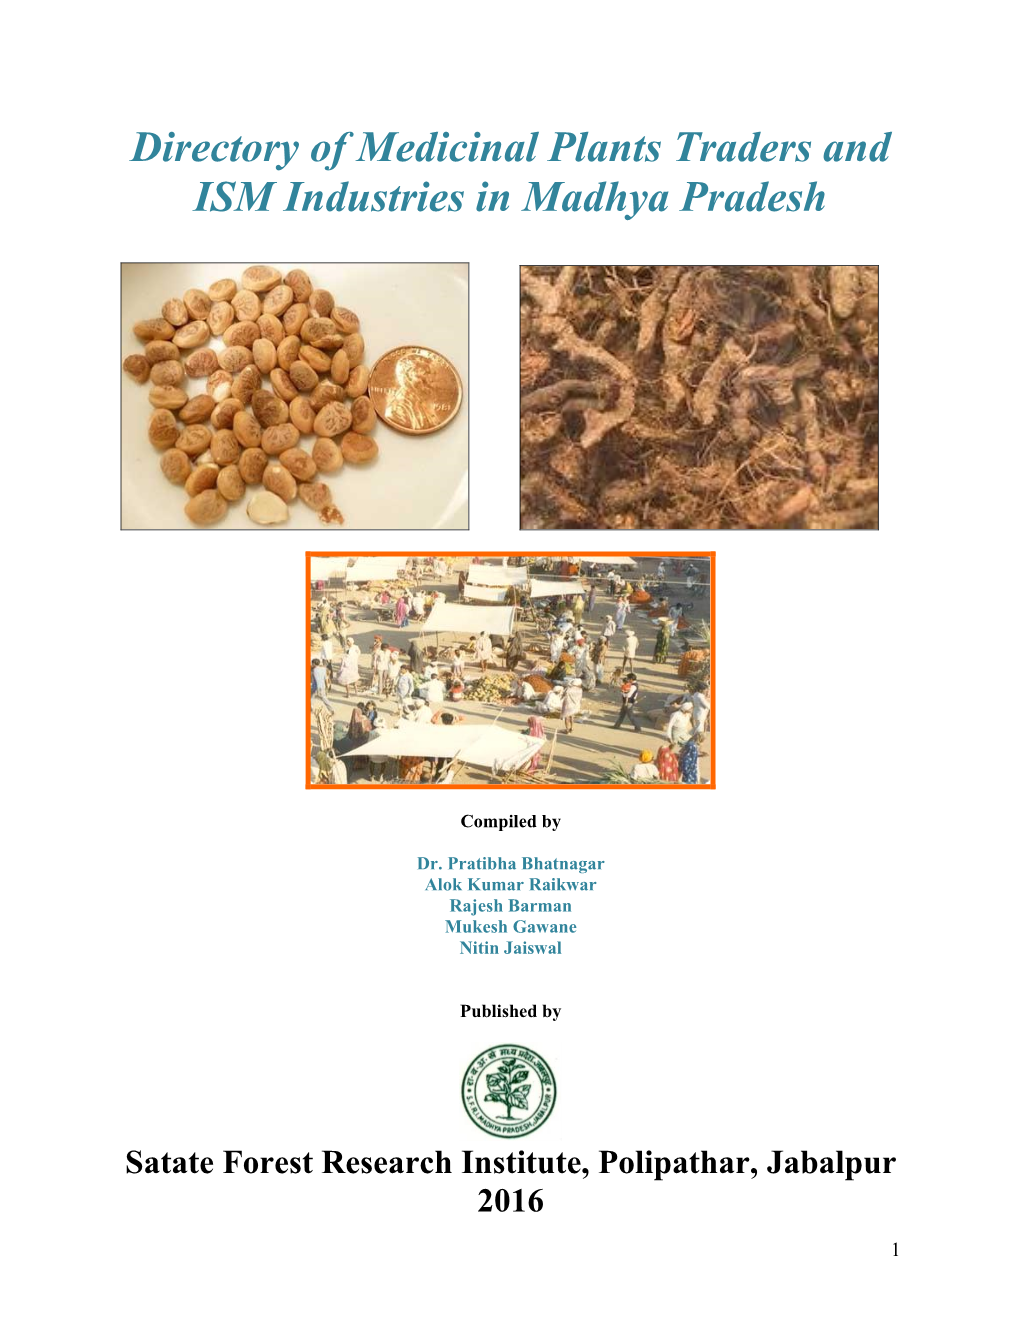 Directory of Medicinal Plants Traders and ISM Industries in Madhya Pradesh